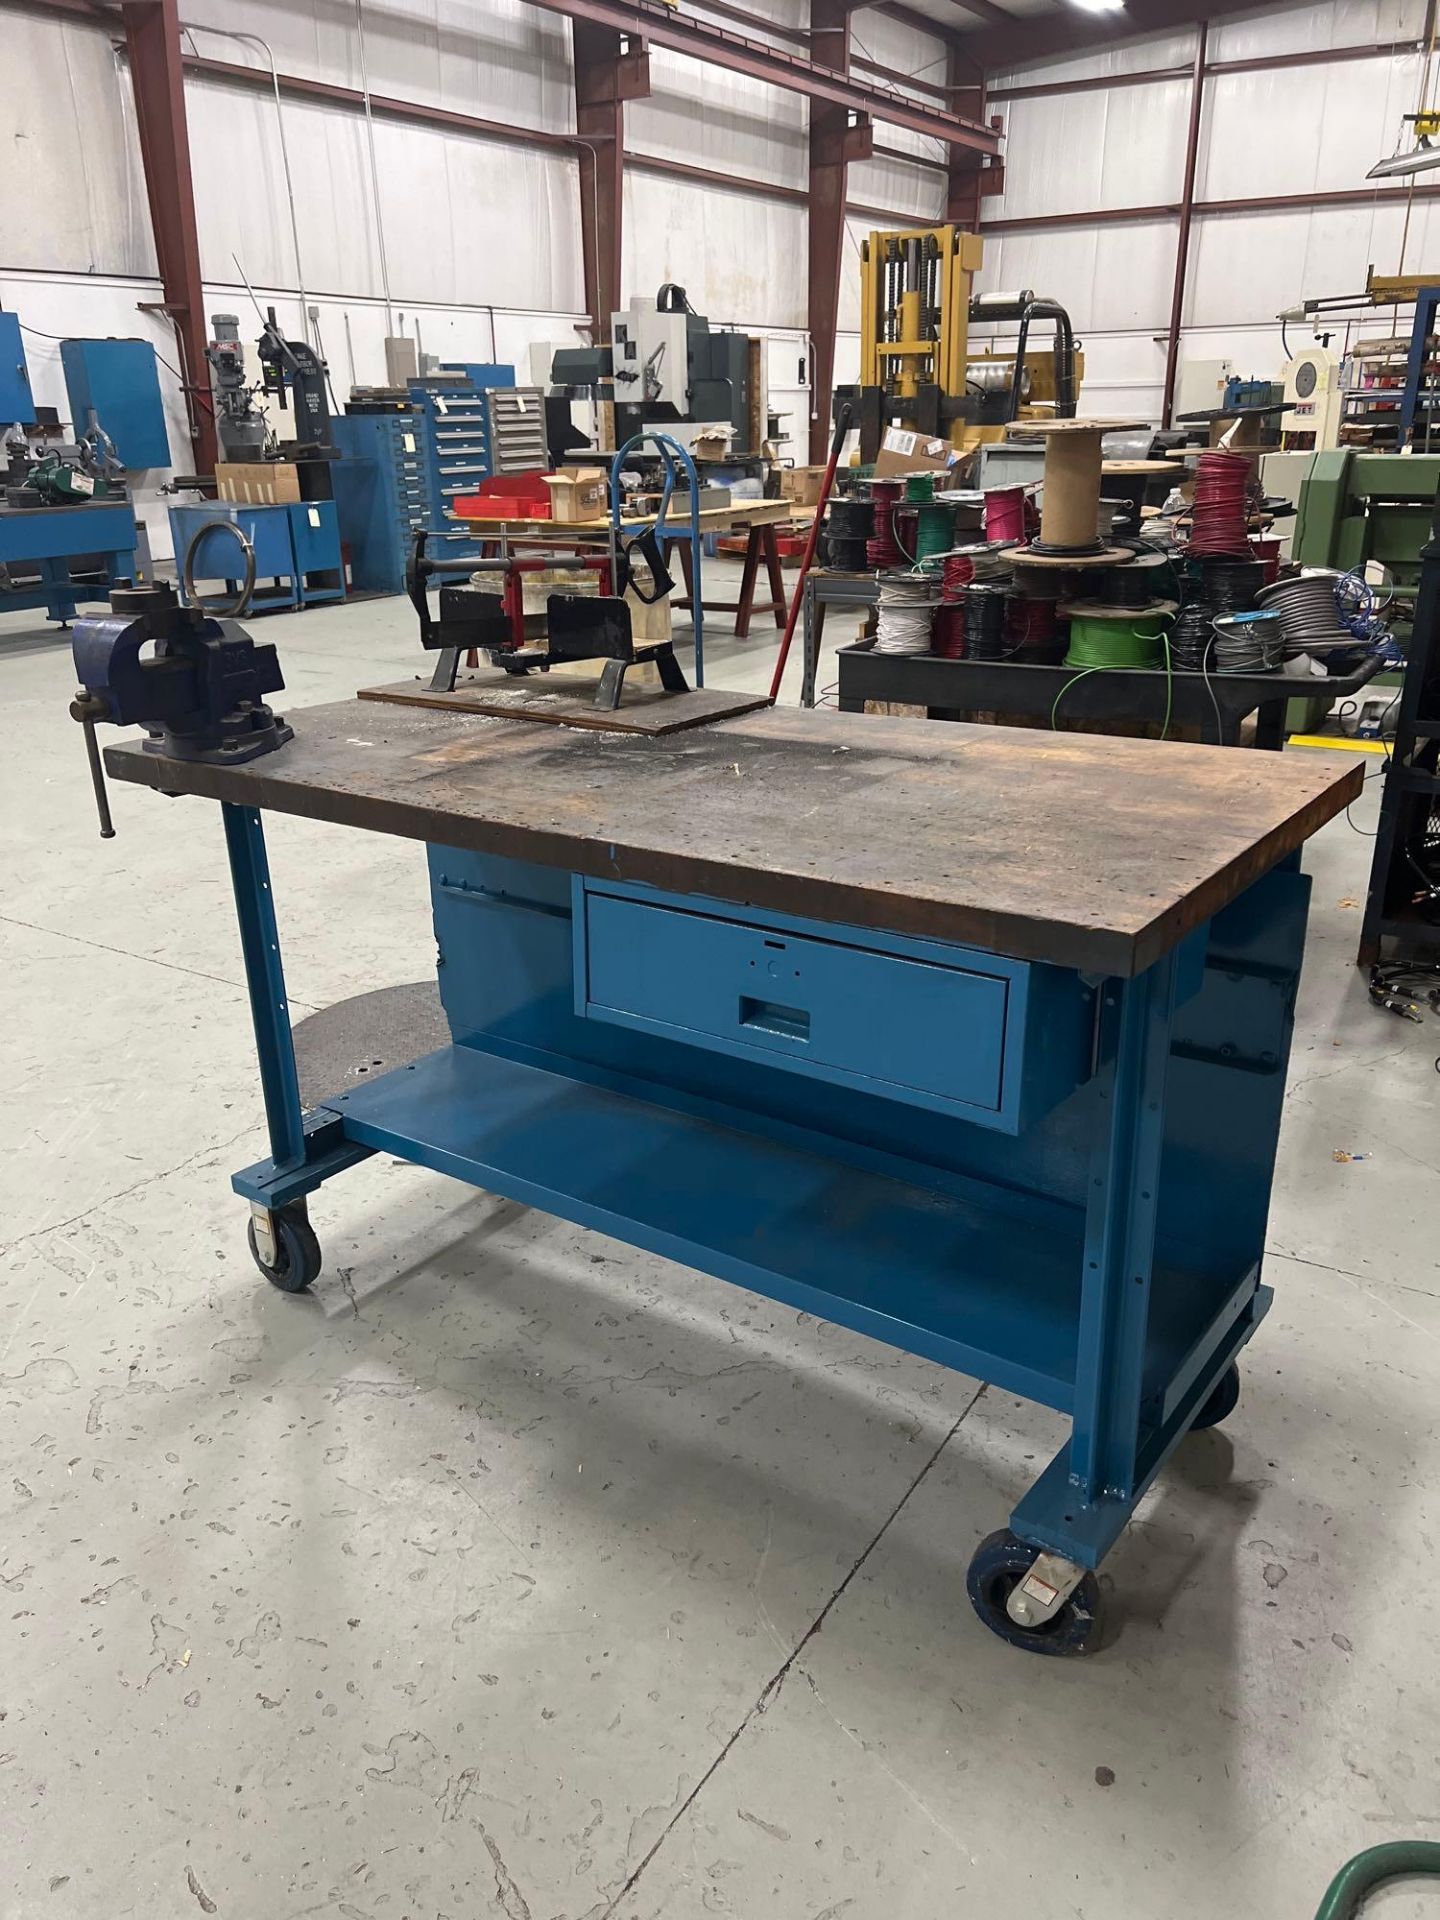 Work Desk on Wheels with Vise and Saw - Image 2 of 6